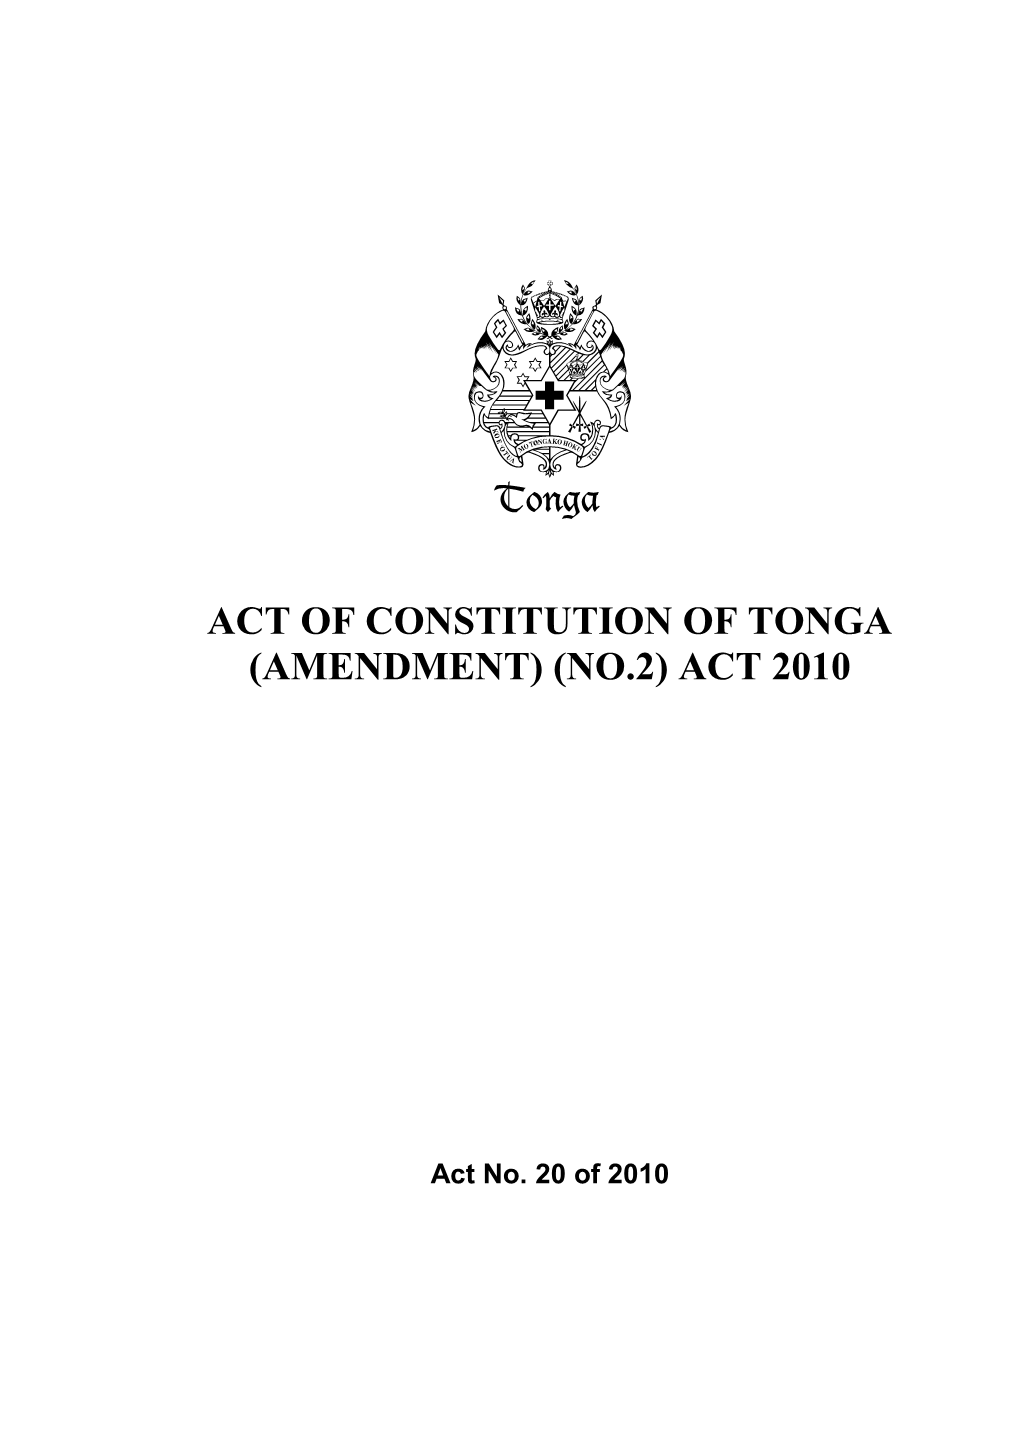 Act of Constitution of Tonga (Amendment) (No.2) Act 2010